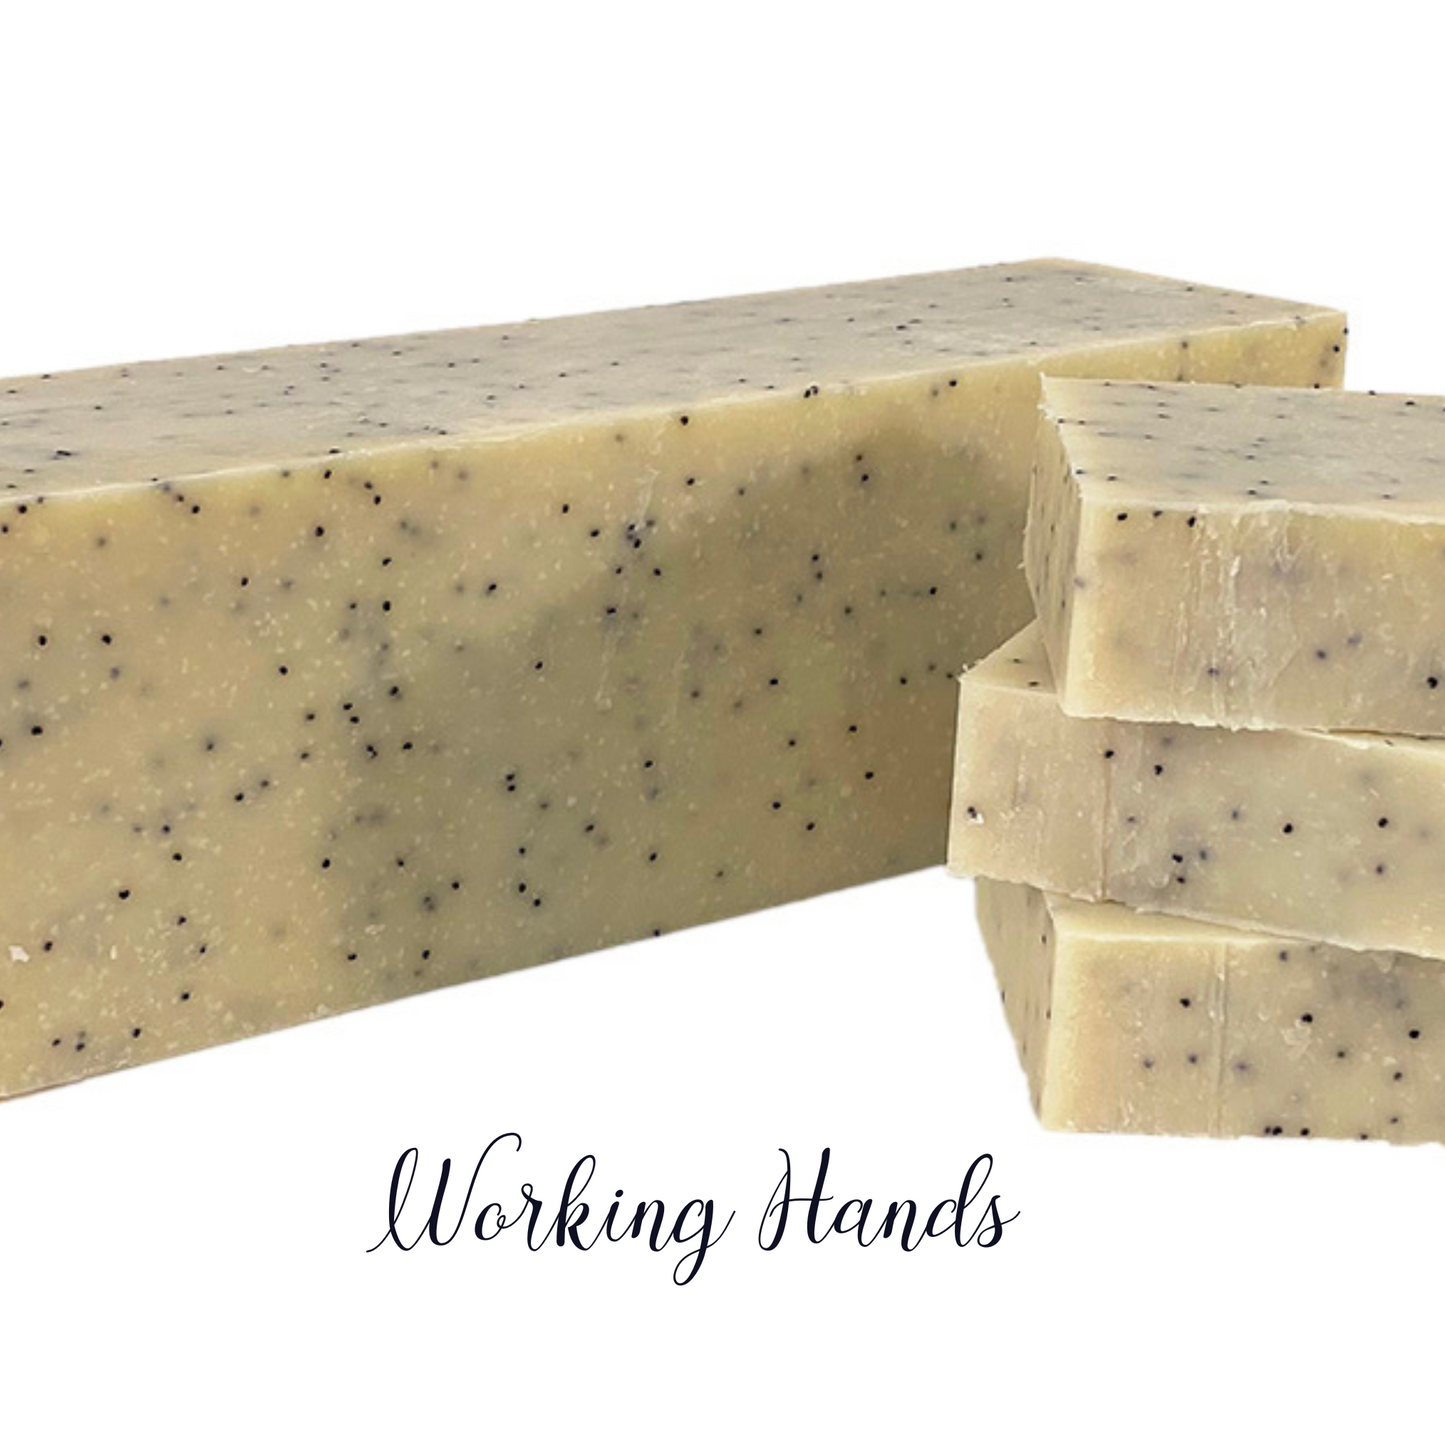 working hands scrub soap.Smells like Orange citrus with poppy seeds that act as a natural grime remover.